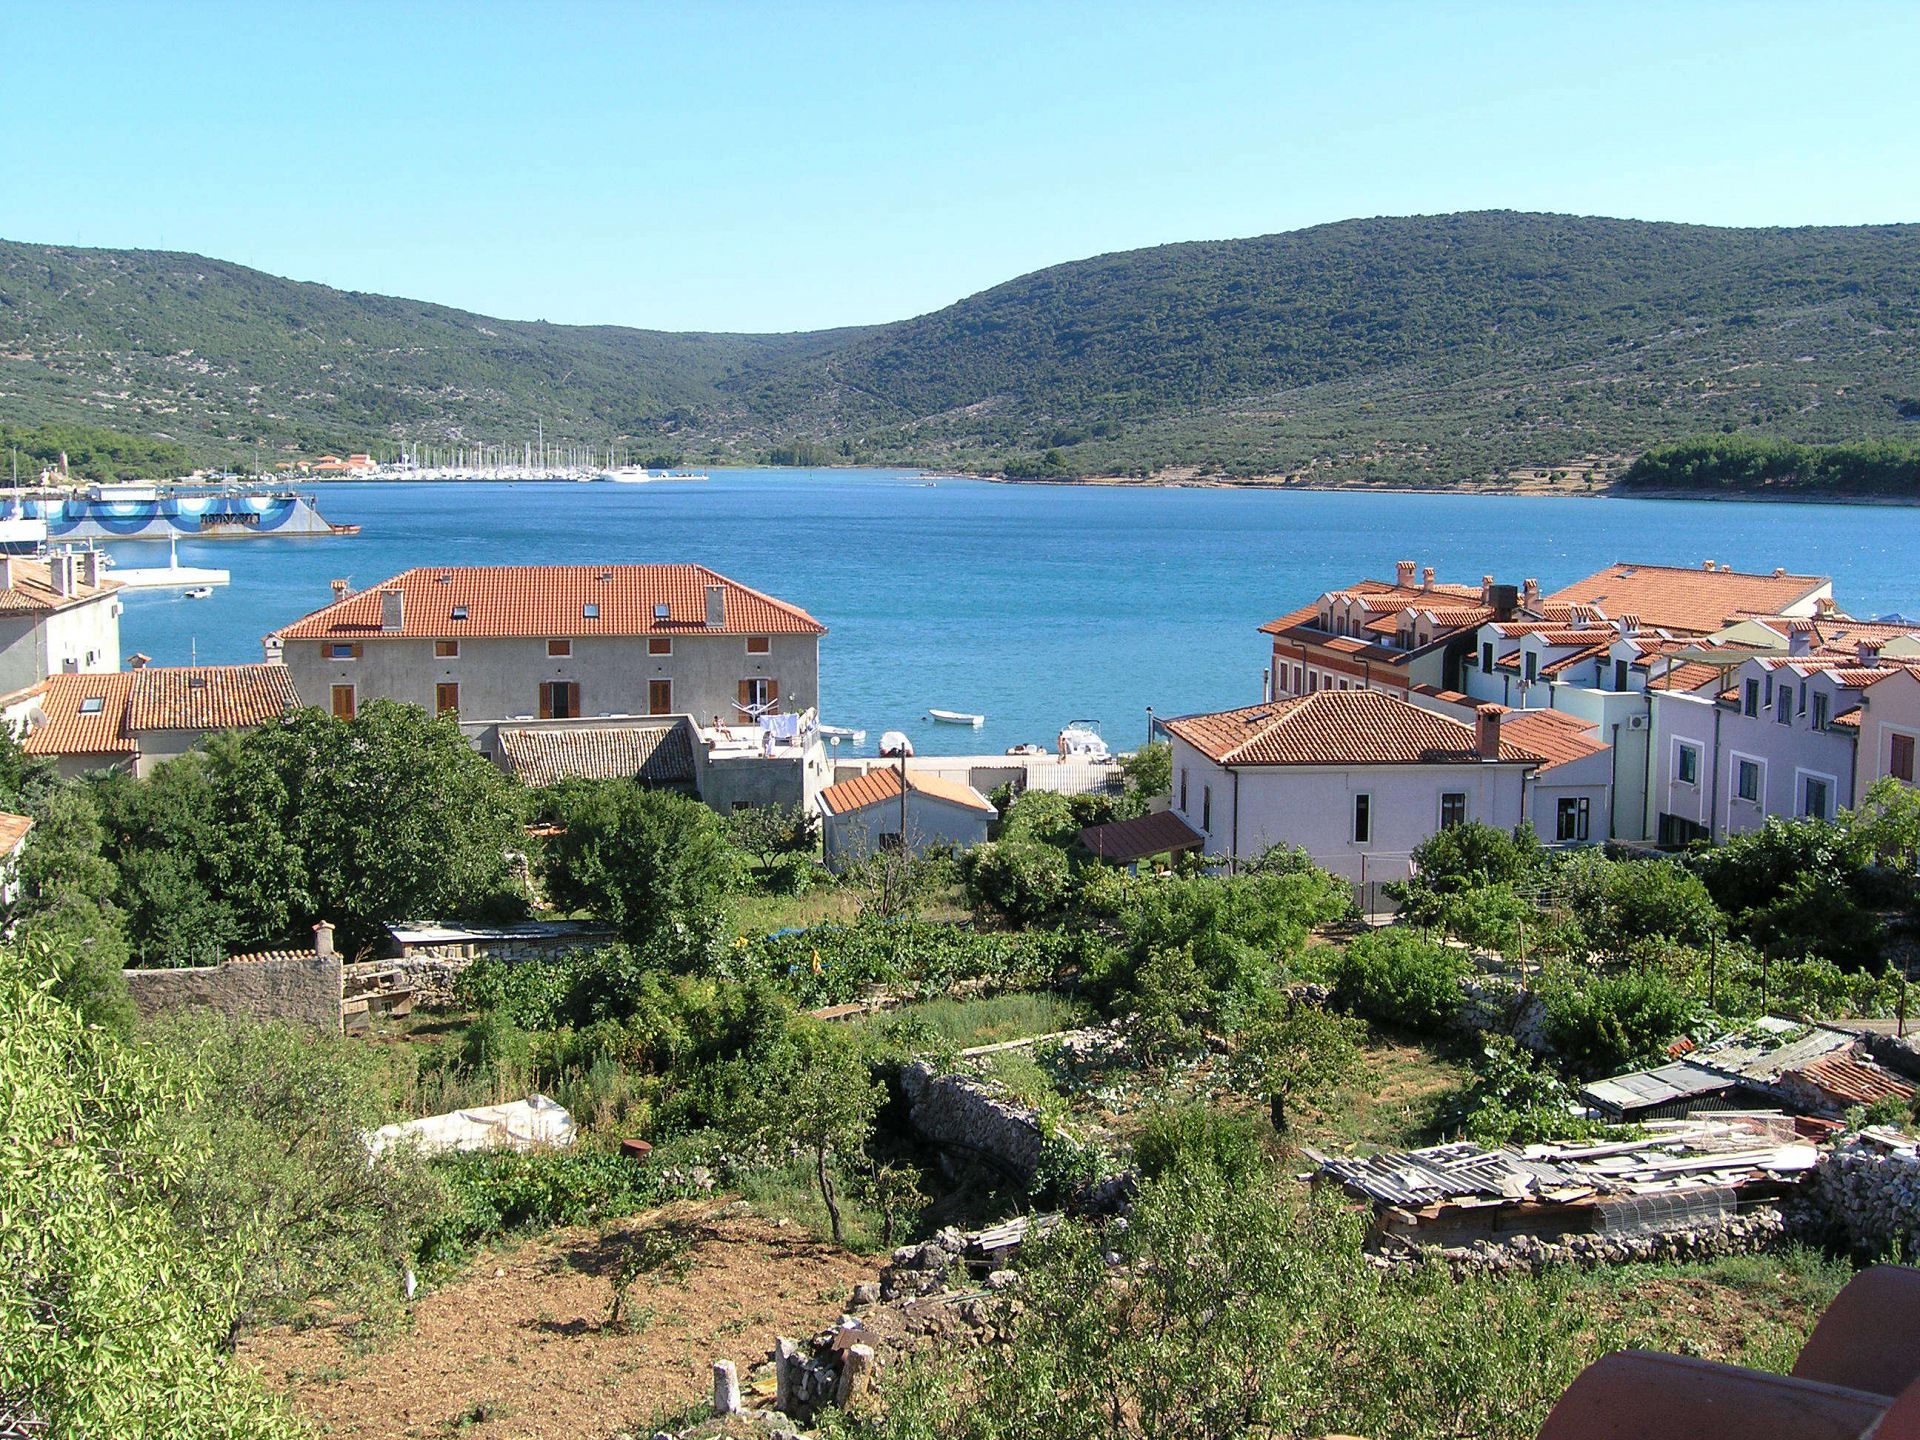 Apartmani Mici 1 - great location and relaxing: A1(4+2) , SA2(2) Cres - Otok Cres  